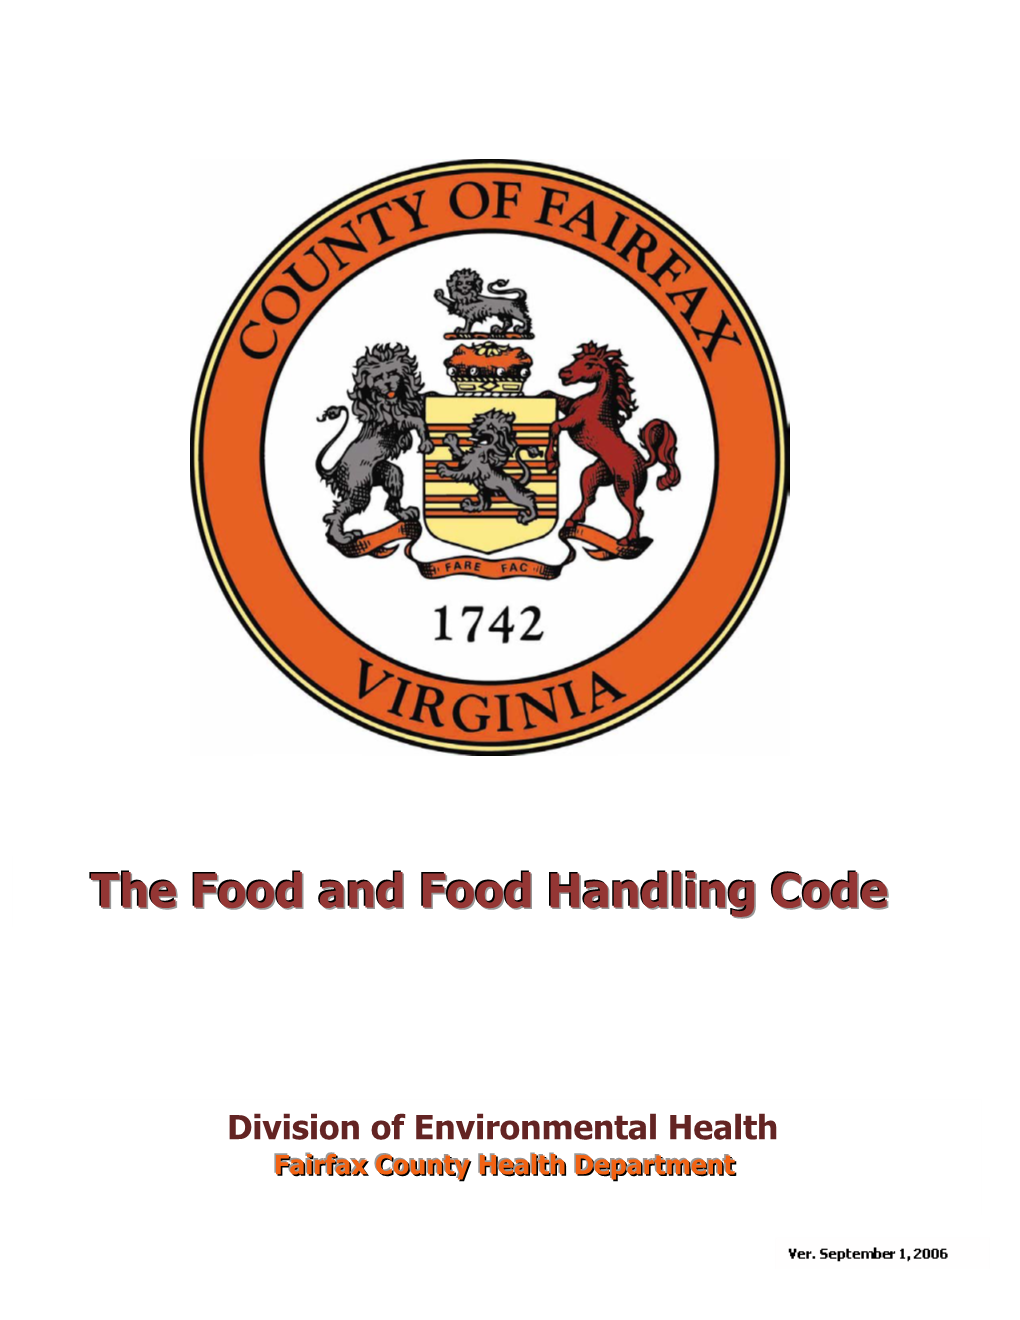 The Food and Food Handling Code